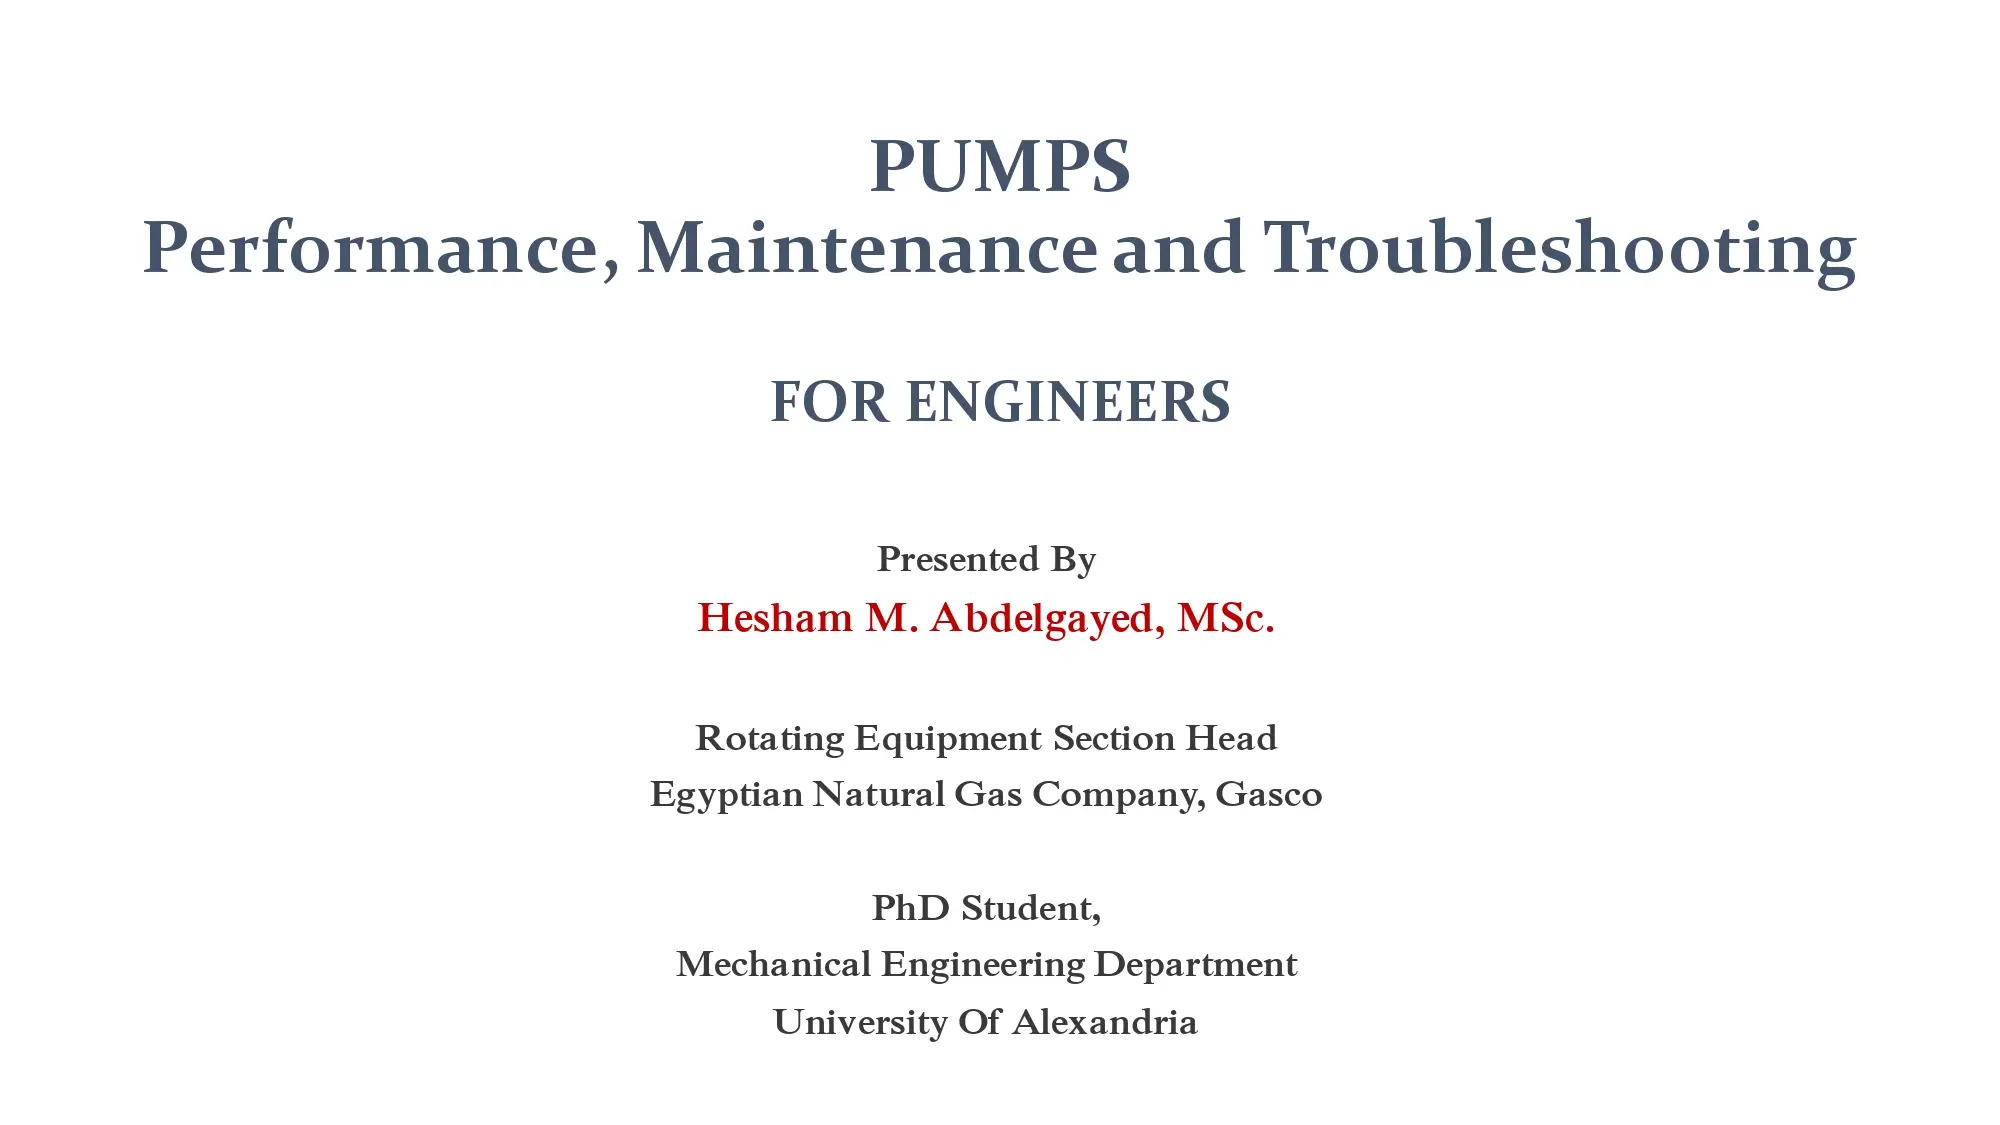 Pumps (Performance, Maintenance and Troubleshooting for Engineers)